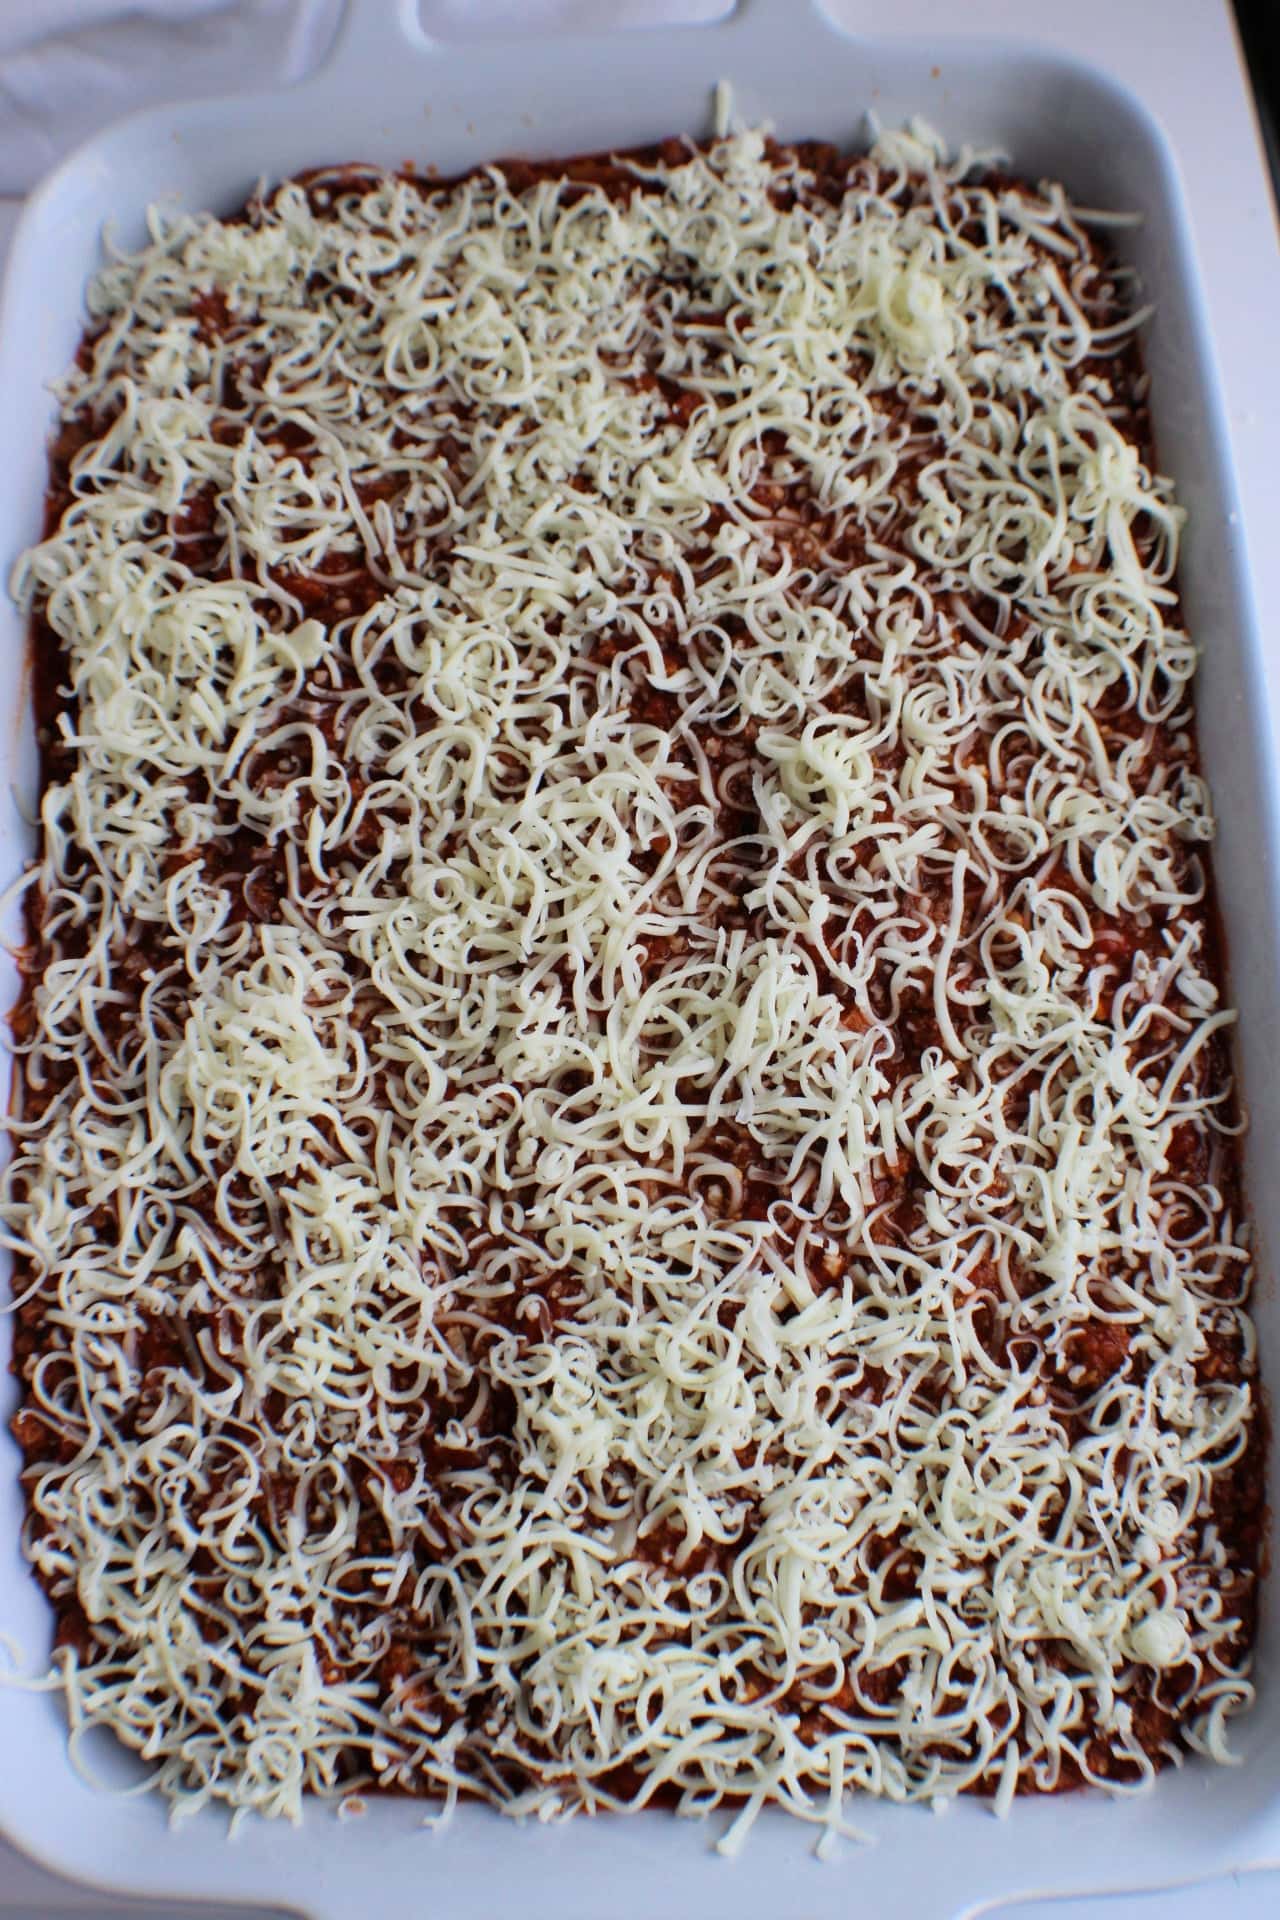 baked spaghetti casserole with shredded cheese over the top